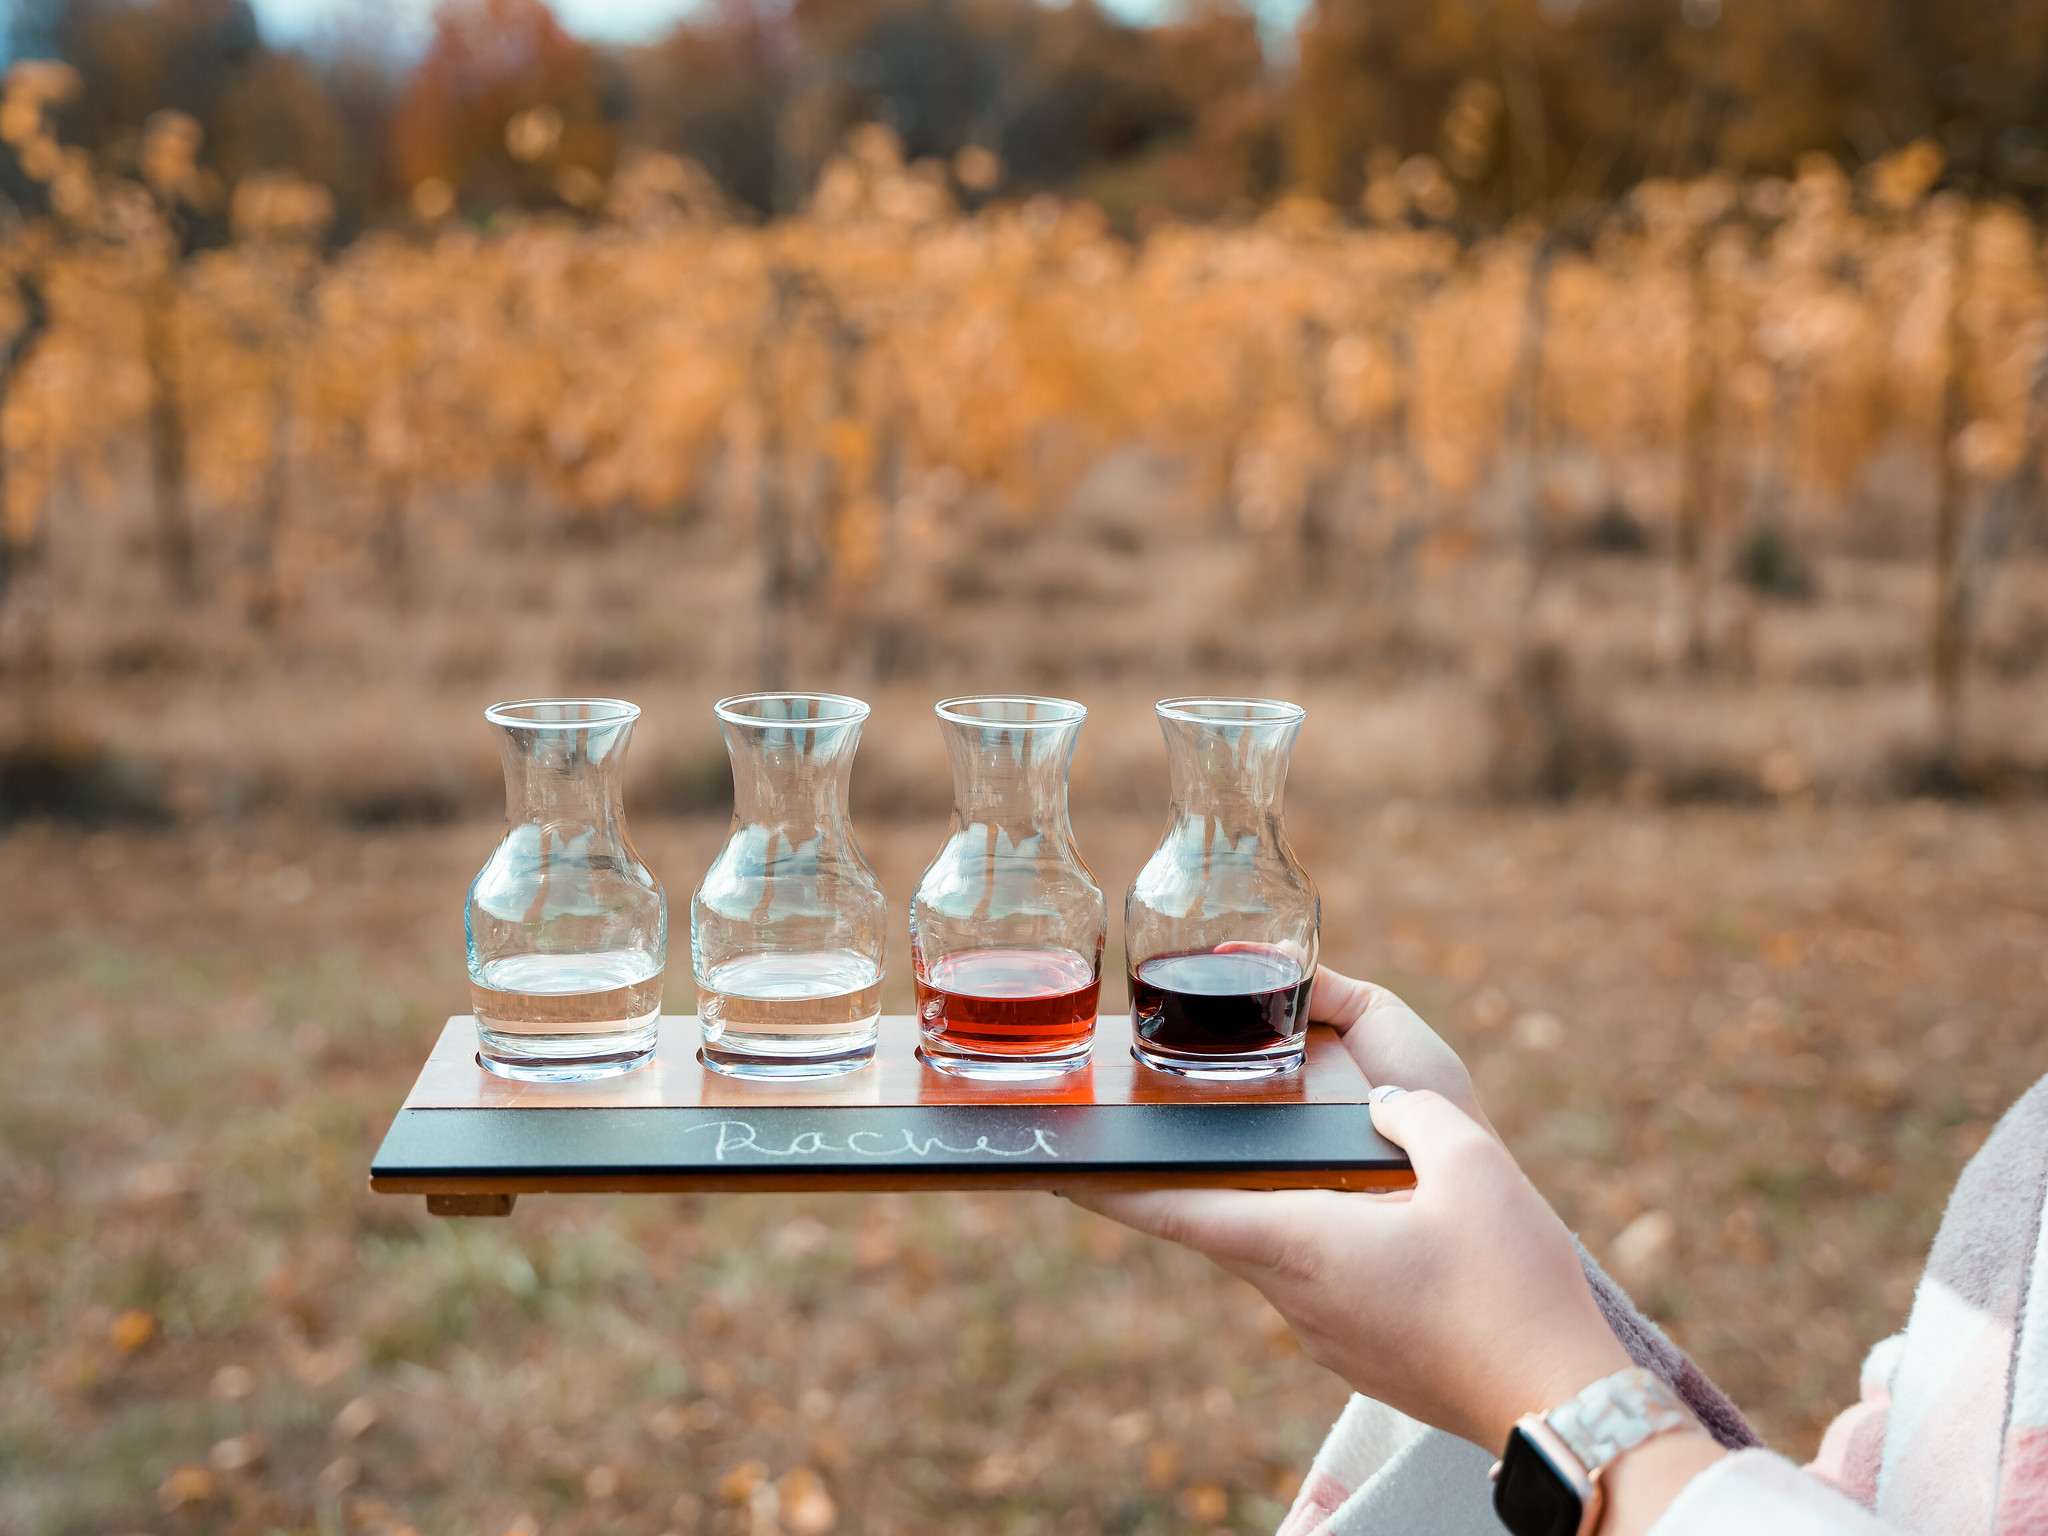 Shelburne Vineyard Winery | Shelburne VT | My Complete Vermont Fall Travel Guide: What to See, Do & Eat | Ultimate Fall Guide to Vermont | 5 Day Vermont Road Trip | Fall Foliage Road Trip Guide